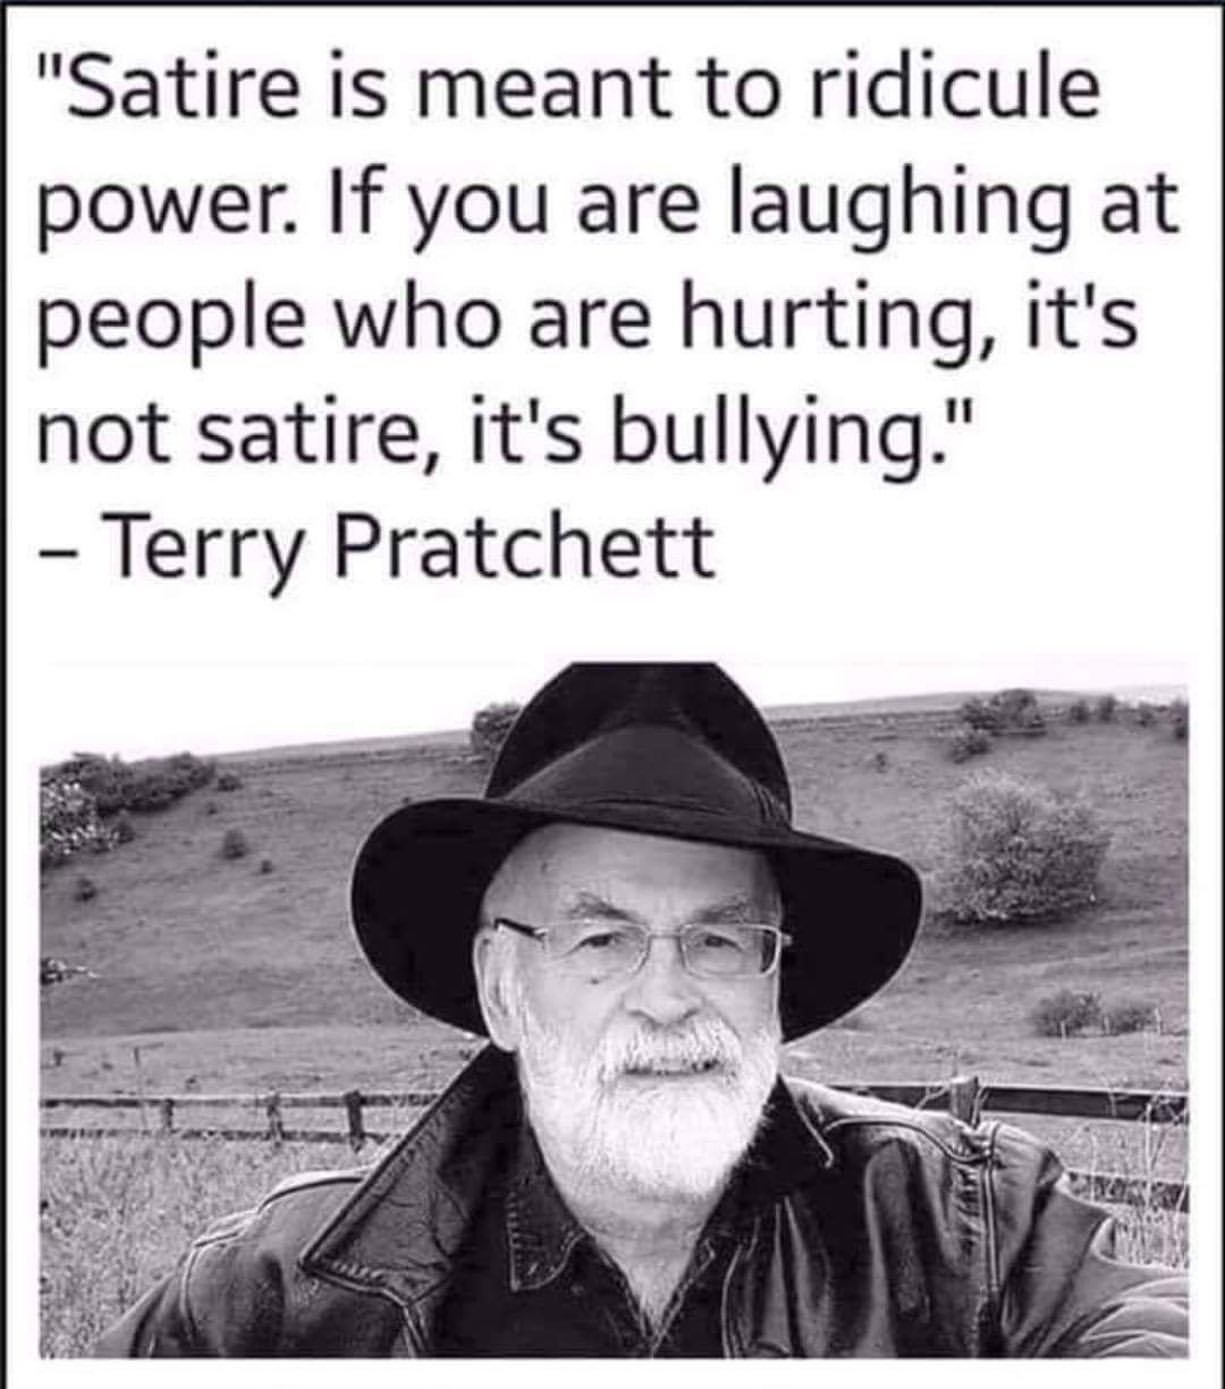 terry pratchett on satire - "Satire is meant to ridicule power. If you are laughing at people who are hurting, it's not satire, it's bullying." Terry Pratchett